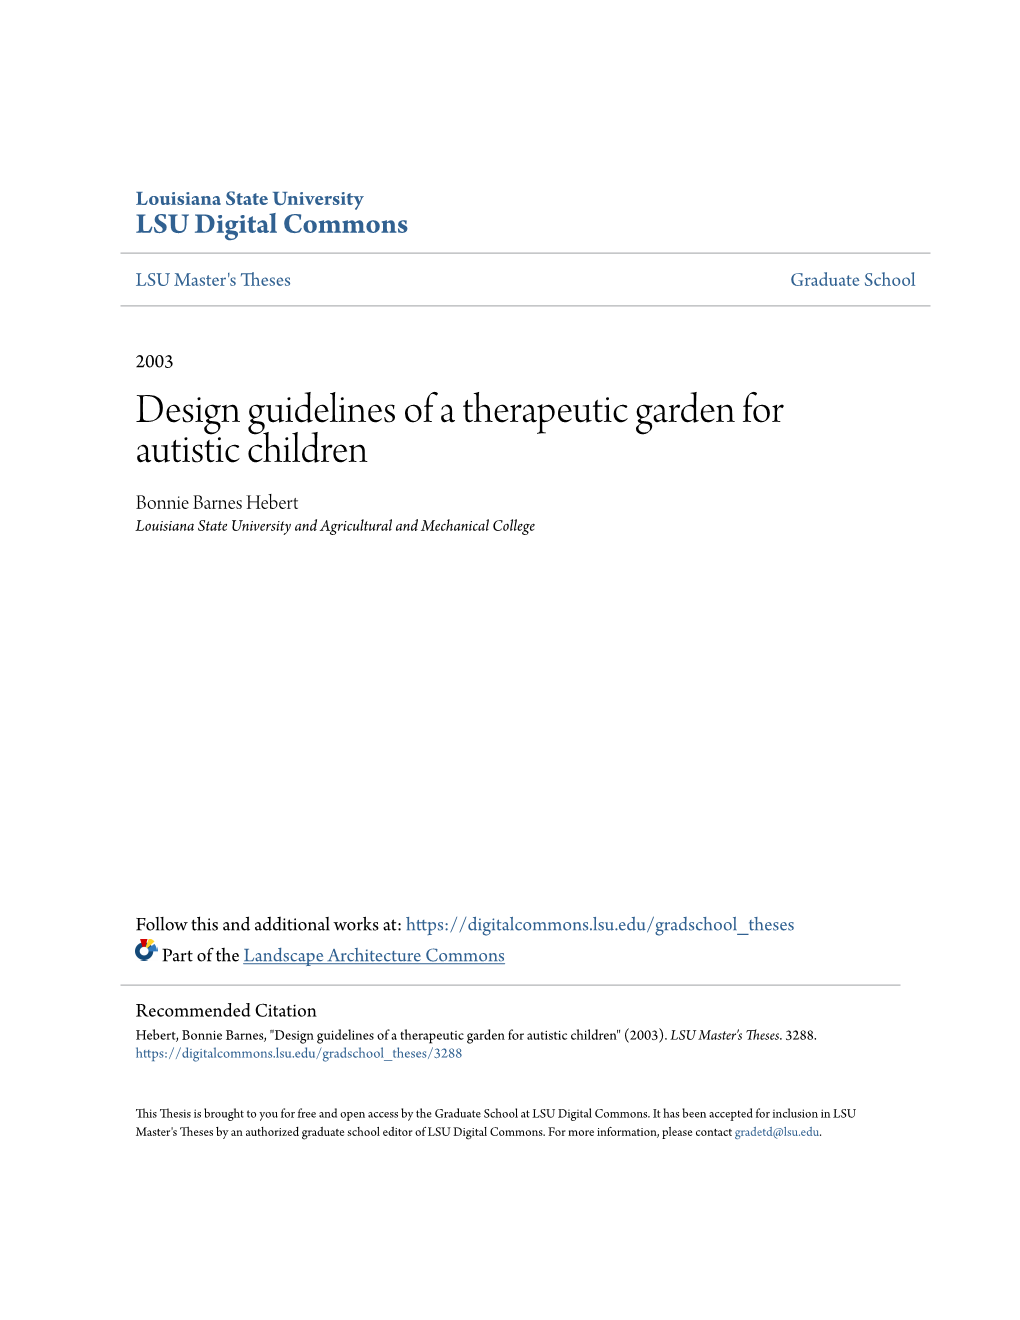 Design Guidelines of a Therapeutic Garden for Autistic Children Bonnie Barnes Hebert Louisiana State University and Agricultural and Mechanical College